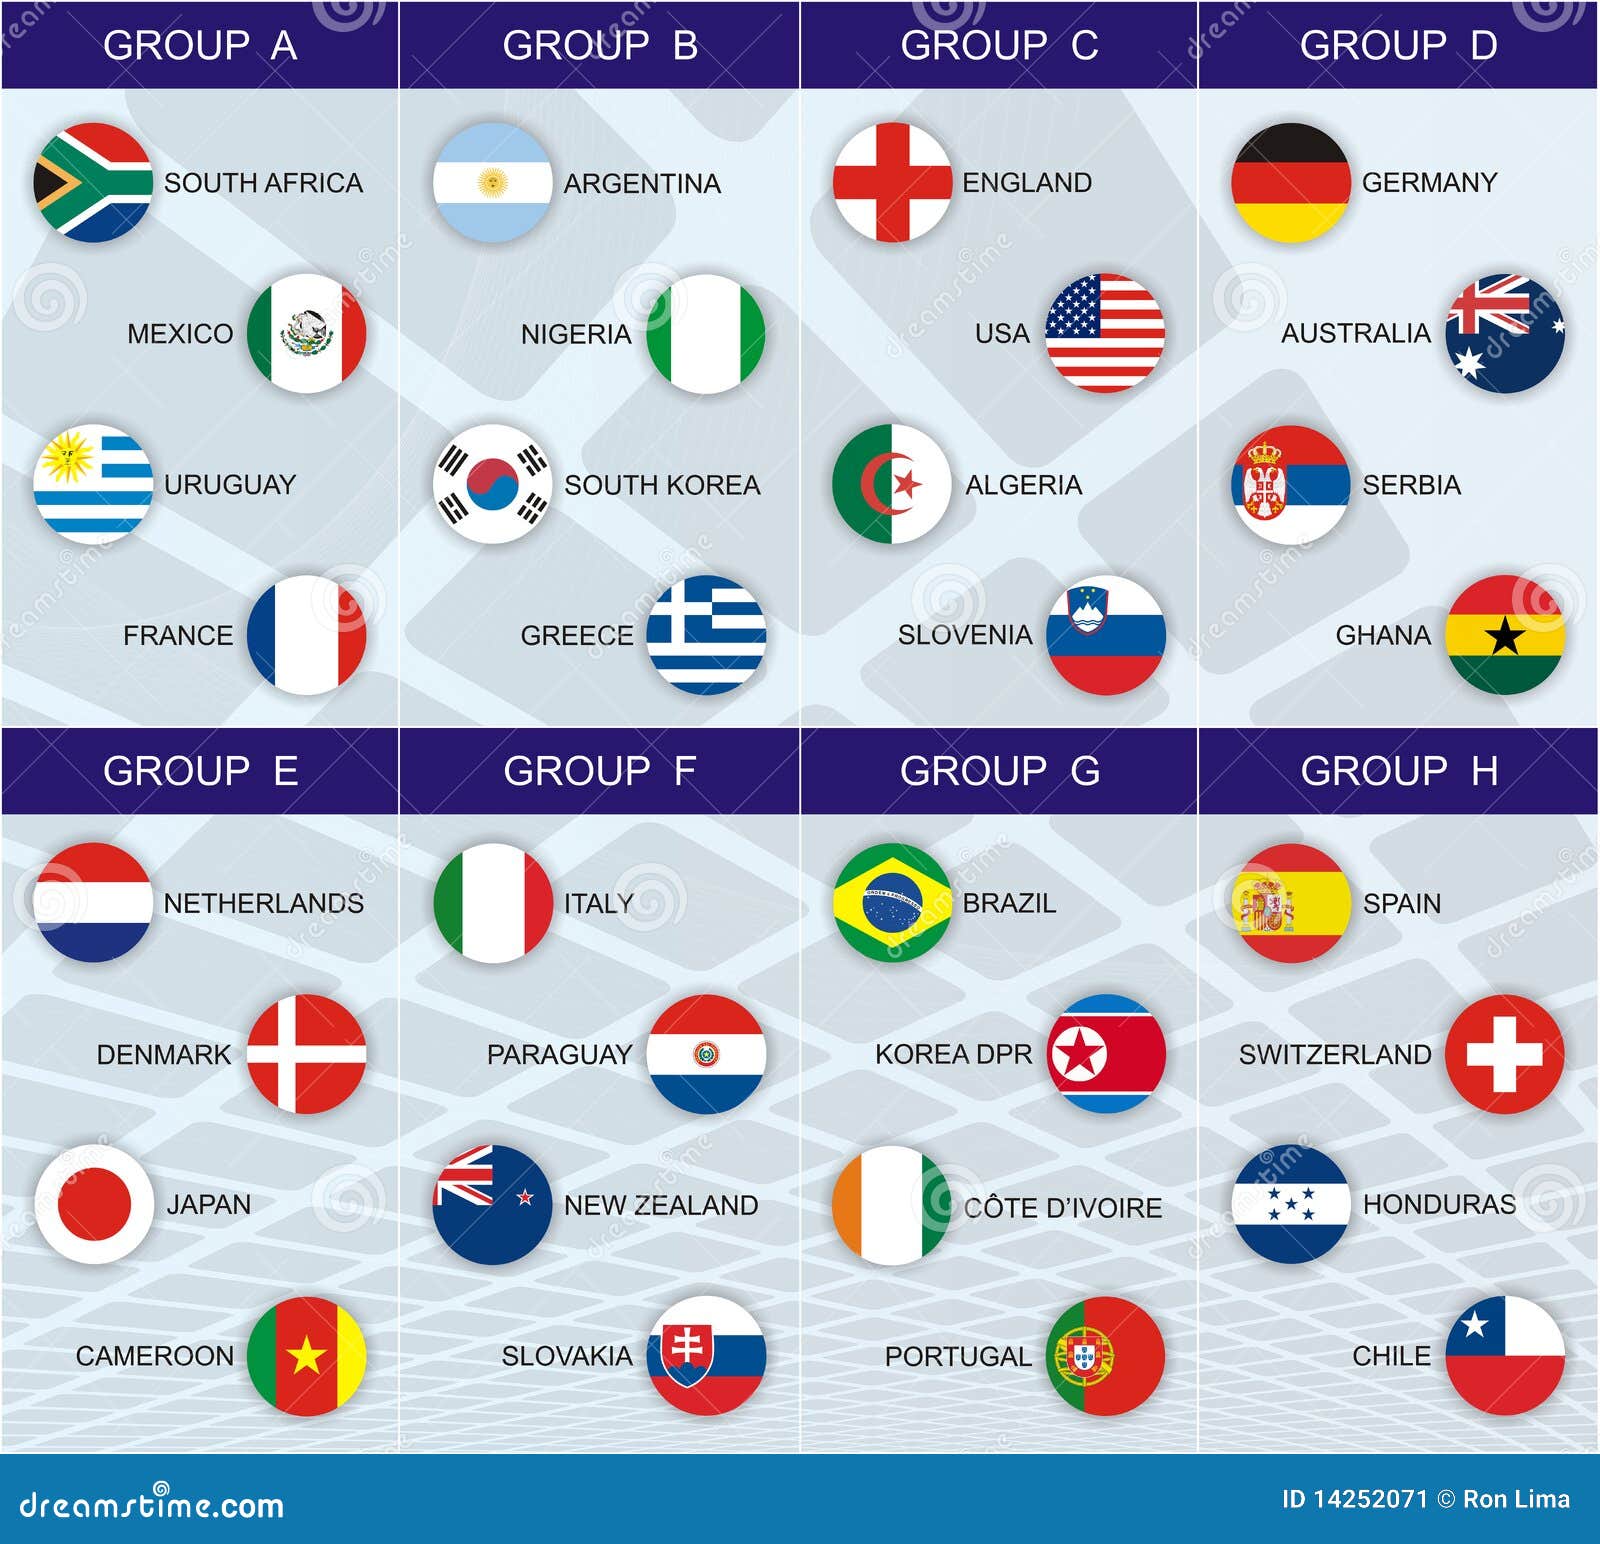 Groups Of The World Cup 2010 Stock Image - Image: 14252071